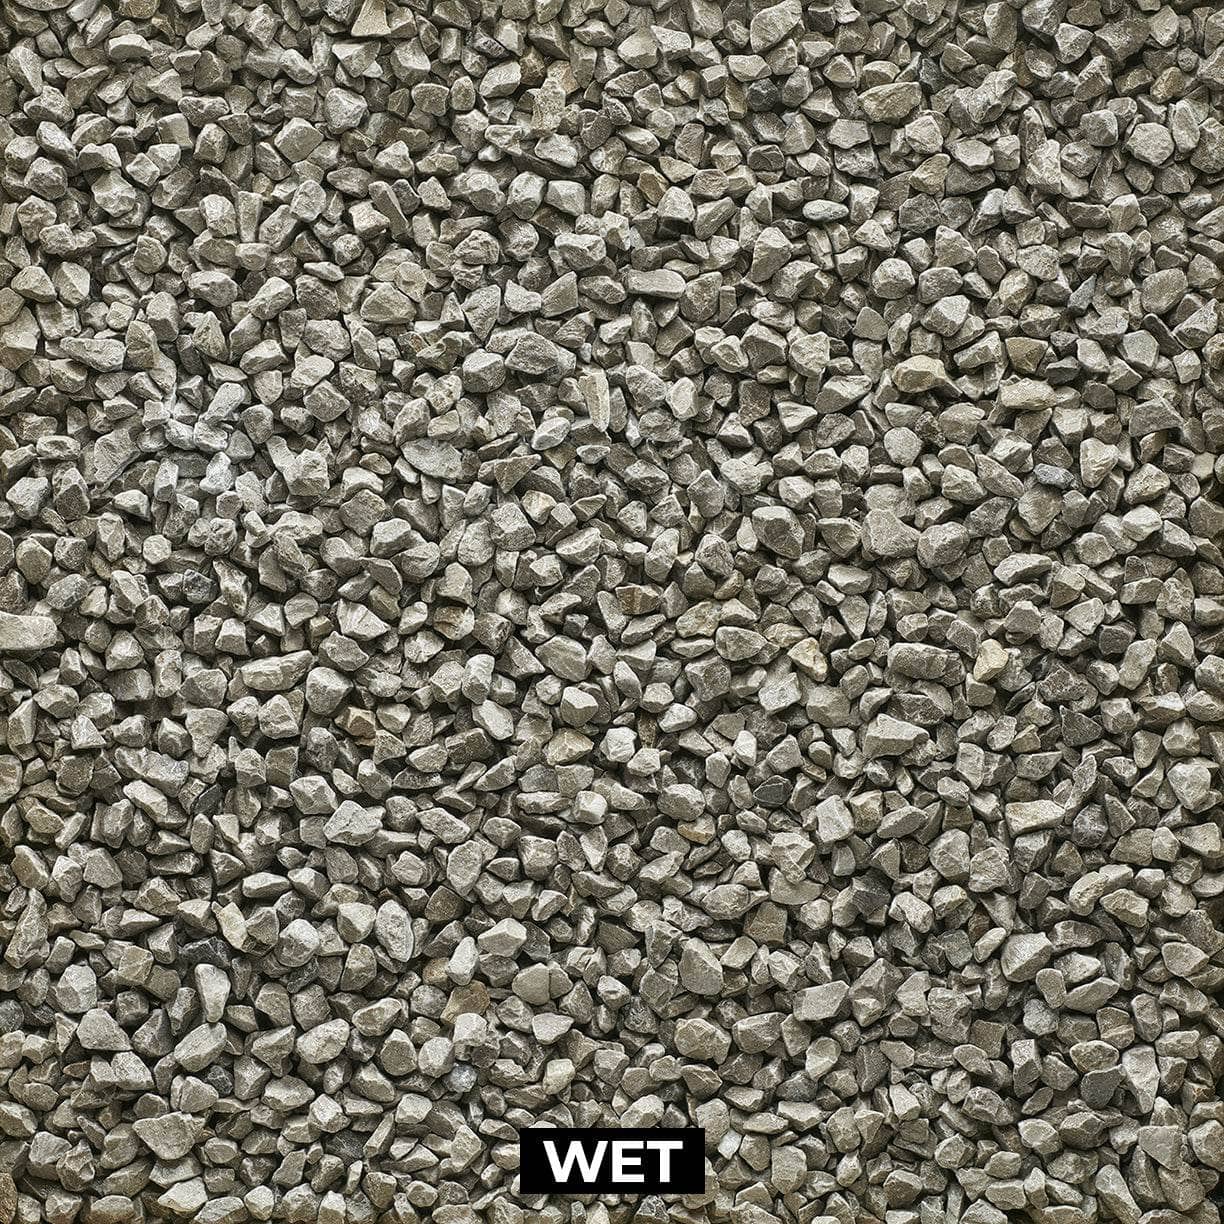 Gardening  -  Altico A10013 Dove Grey Stone Chippings  -  60003129